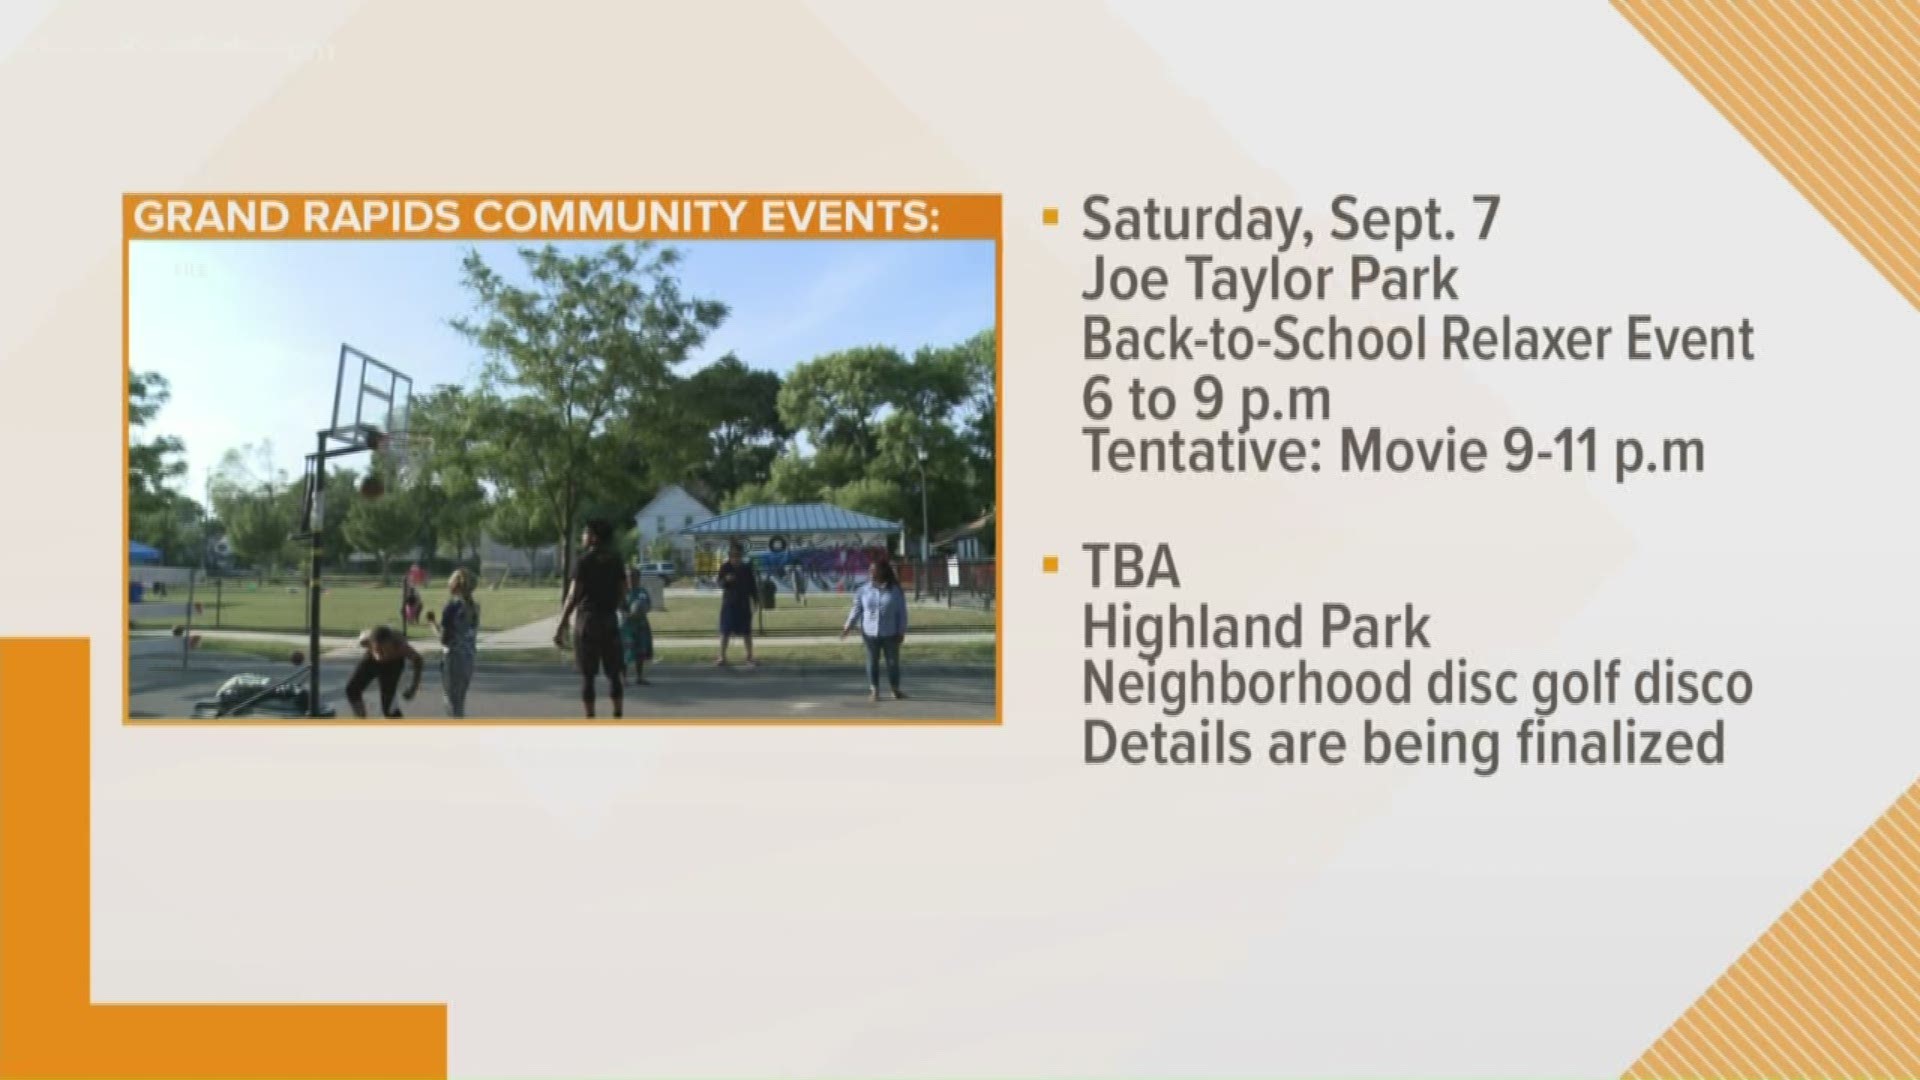 The series of events were developed by the City shortly after a shooting incident at Joe Taylor Park.